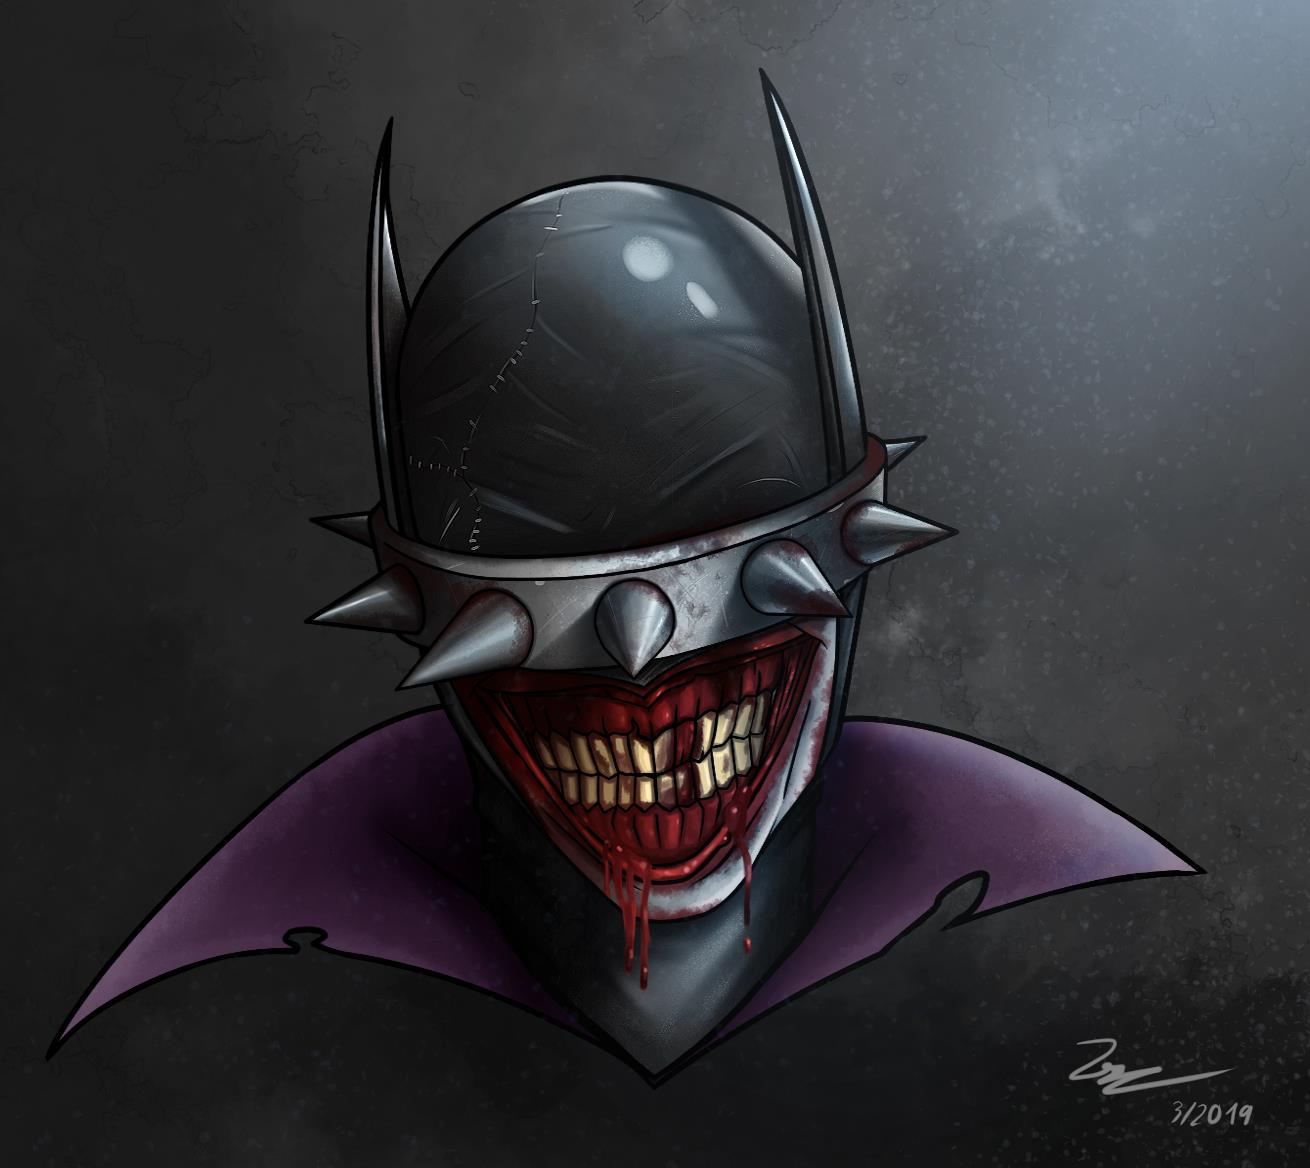 The Batman Who Laughs by canhvedepzai on DeviantArt